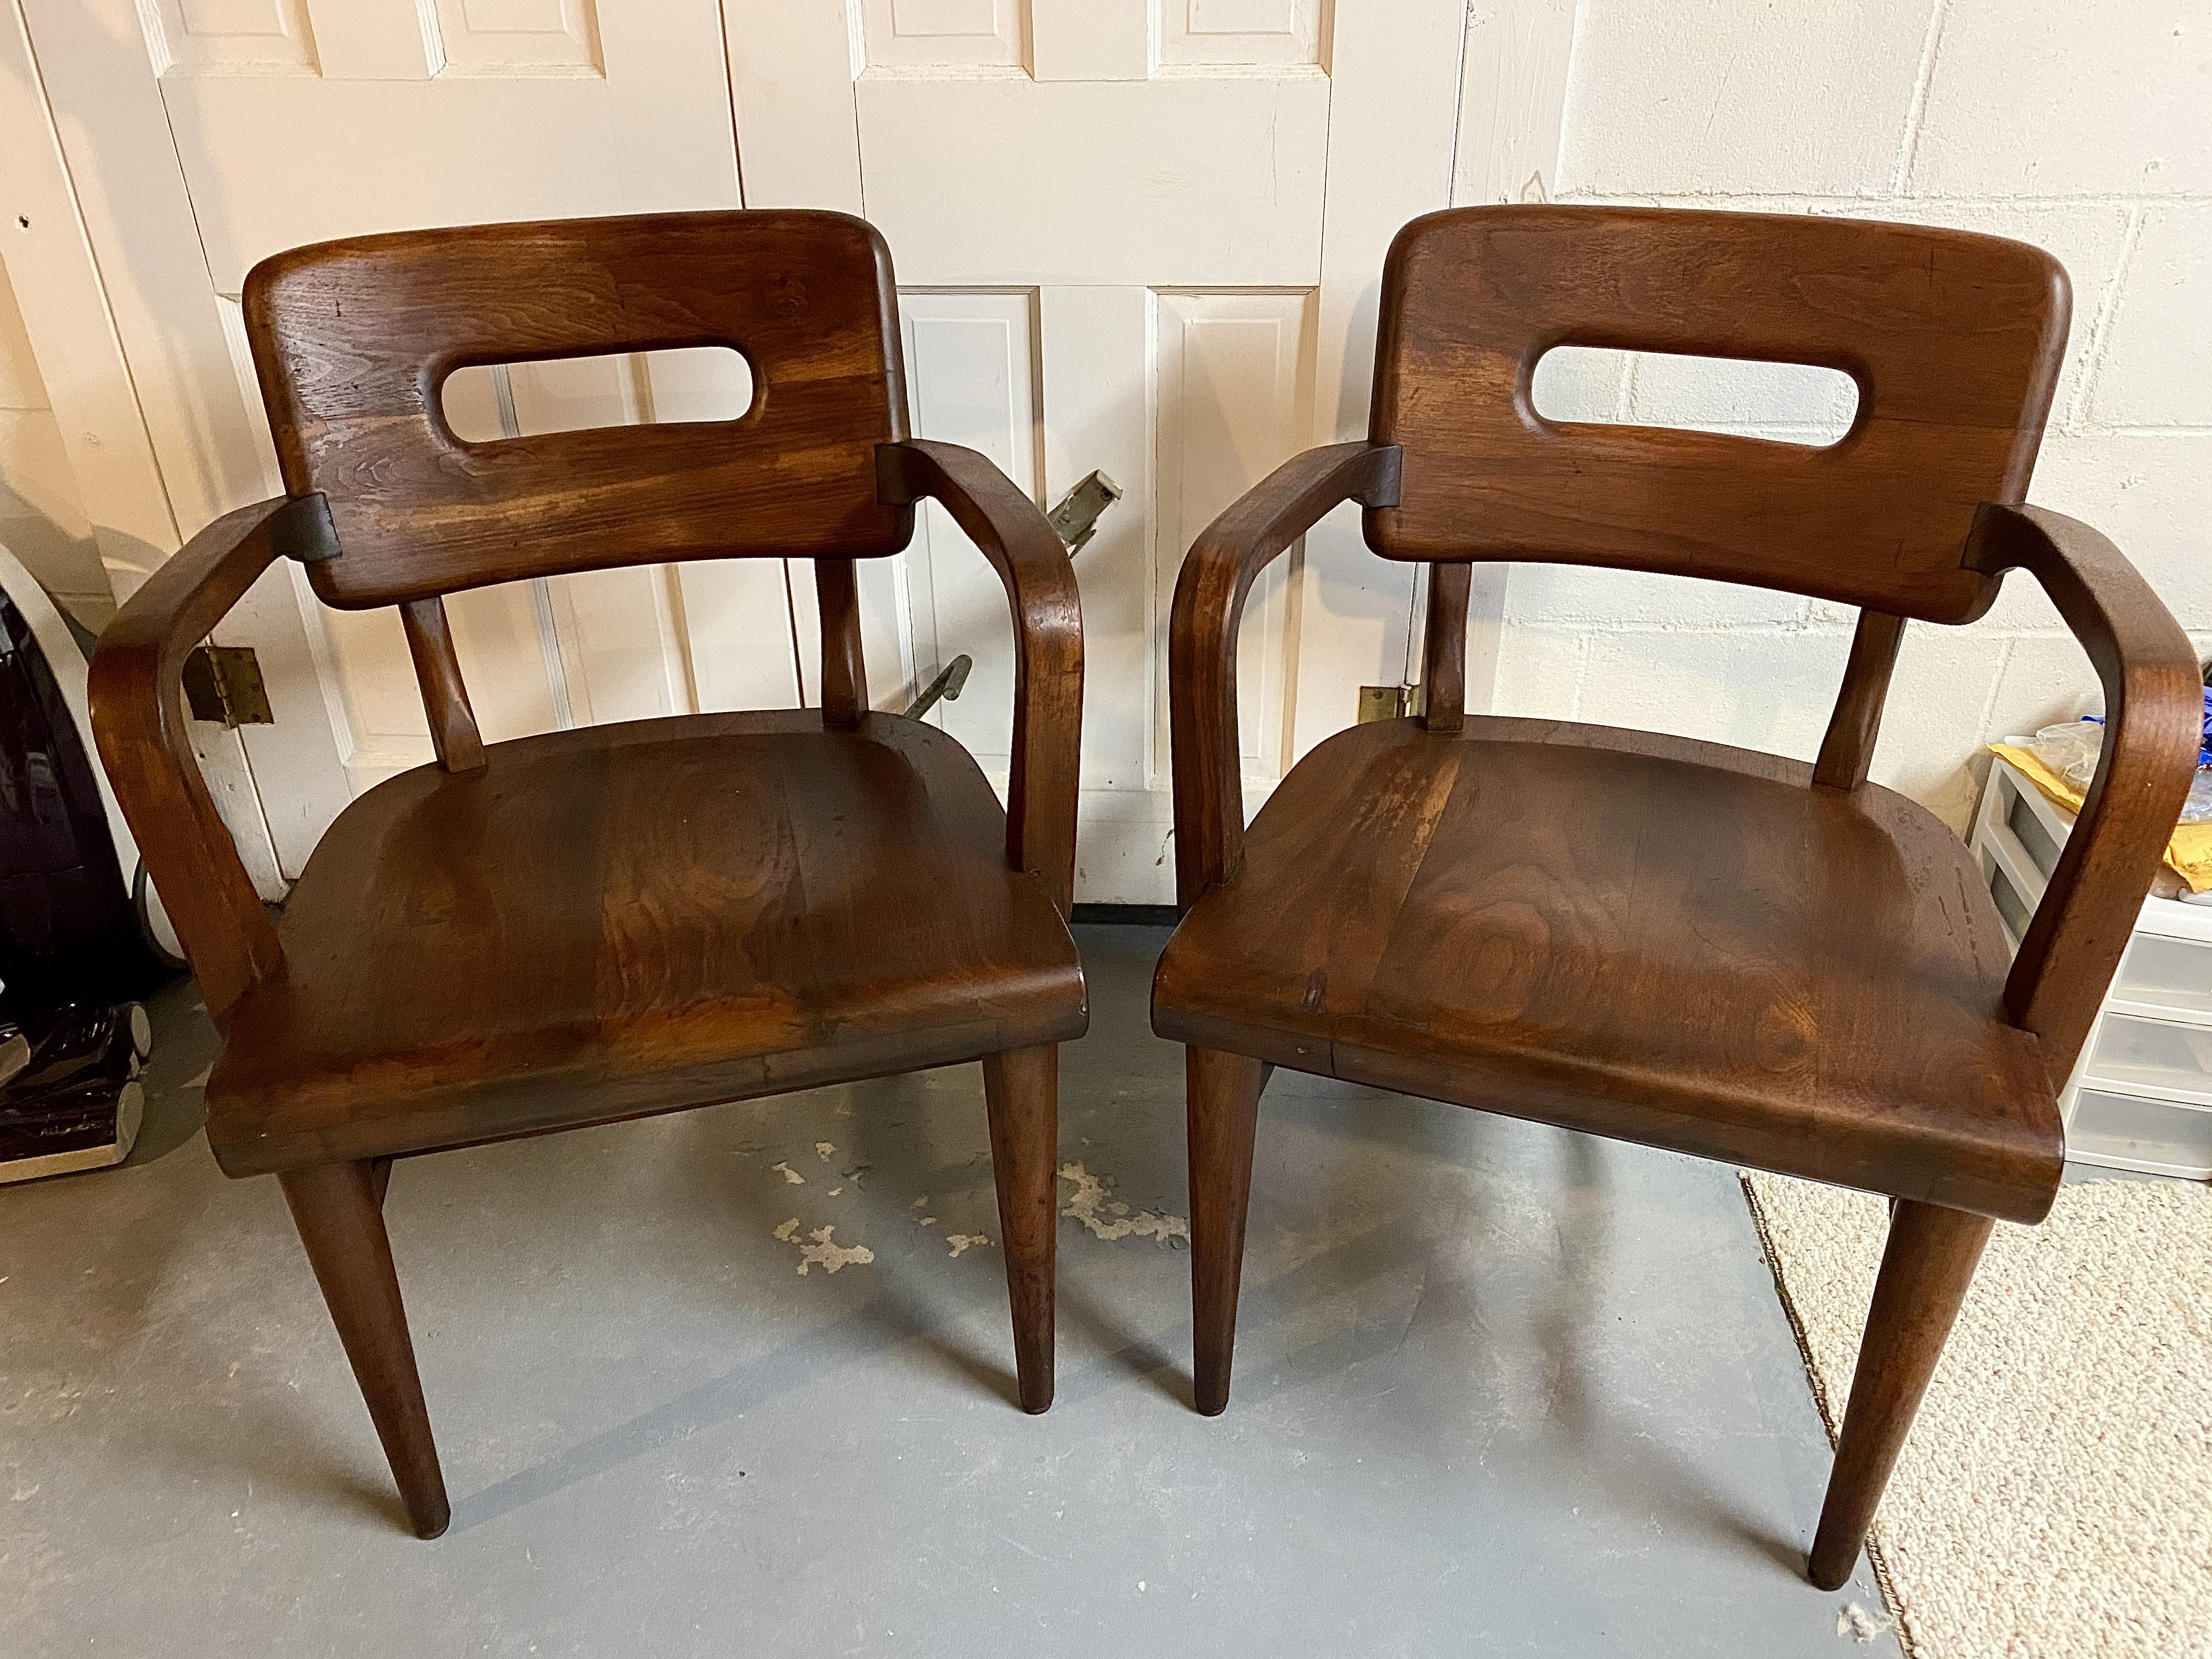 After searching for these in their price range in every antique shop, Biscoe discovered a pair of Gunlocke chairs from the 1950s for $ 150 on the Facebook Marketplace in Falmouth.
